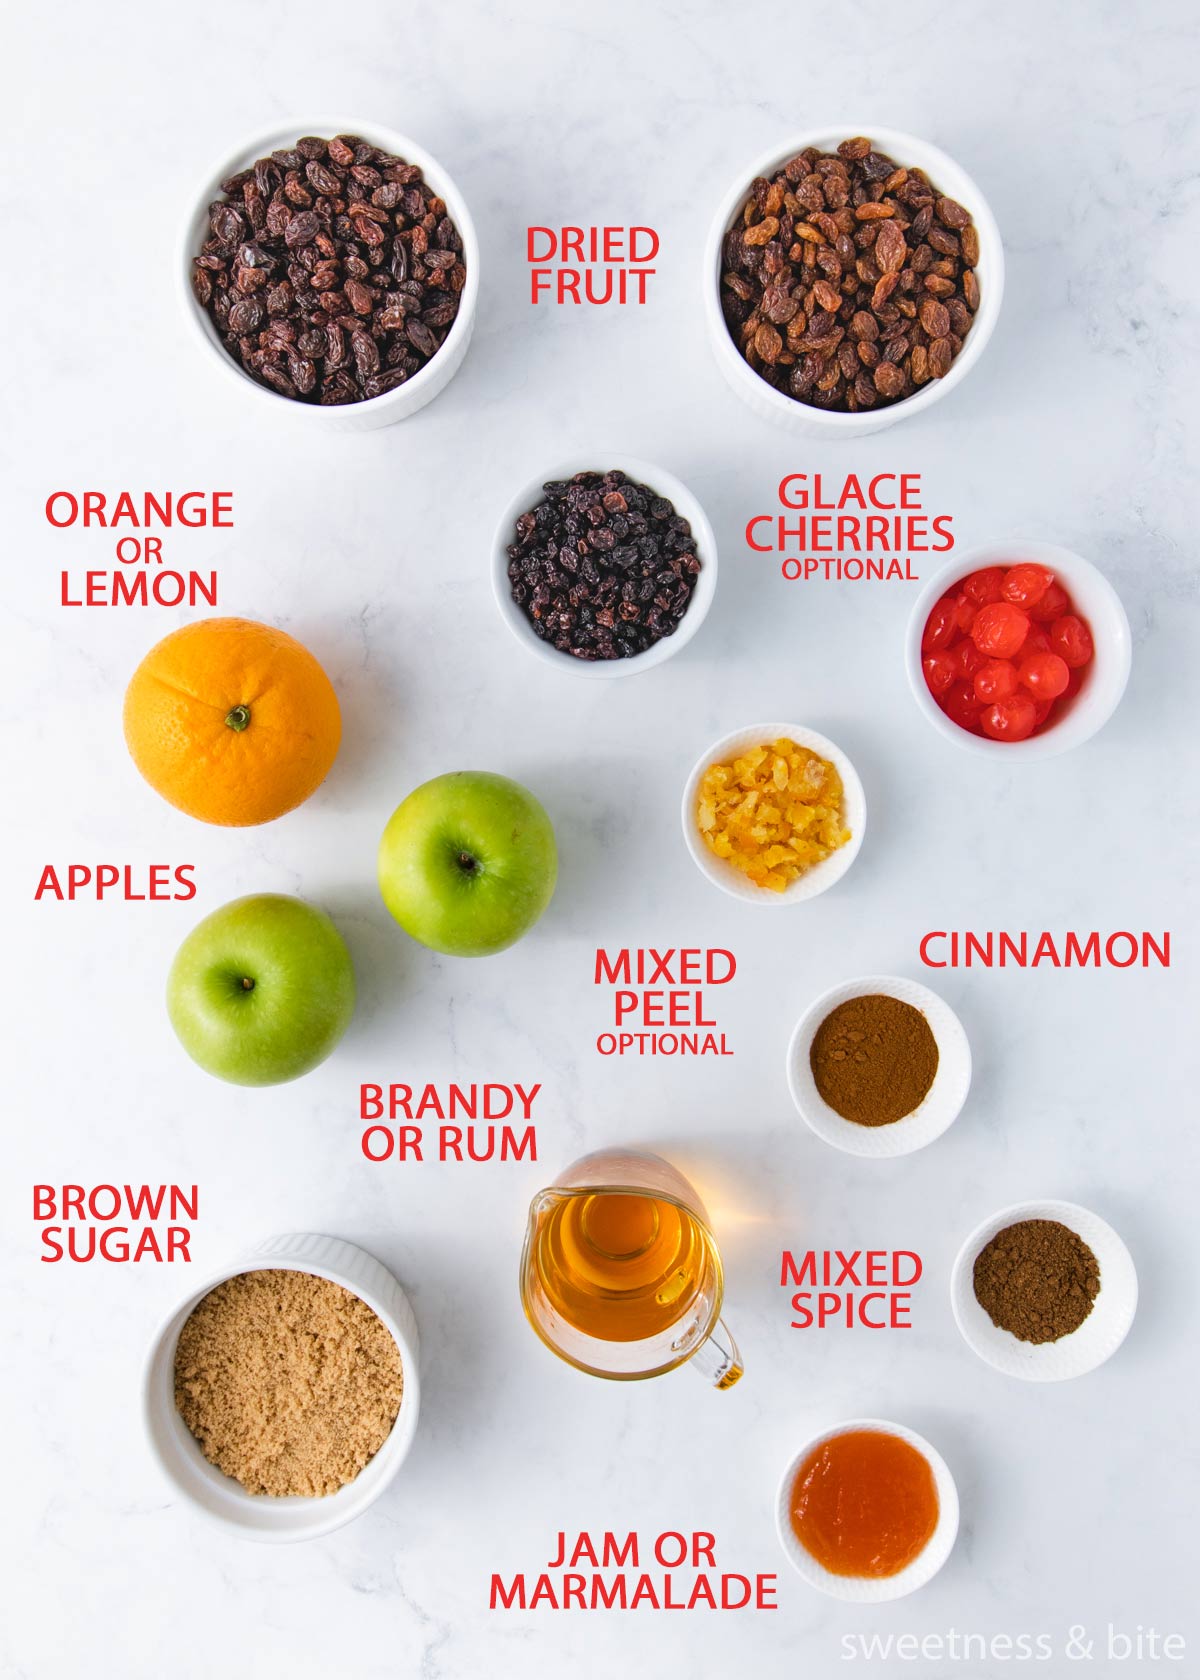 The fruit mince ingredients laid out on a grey marble background with labels - dried fruit, cherries, orange, mixed peel, apples, spices, brown sugar, rum and jam.